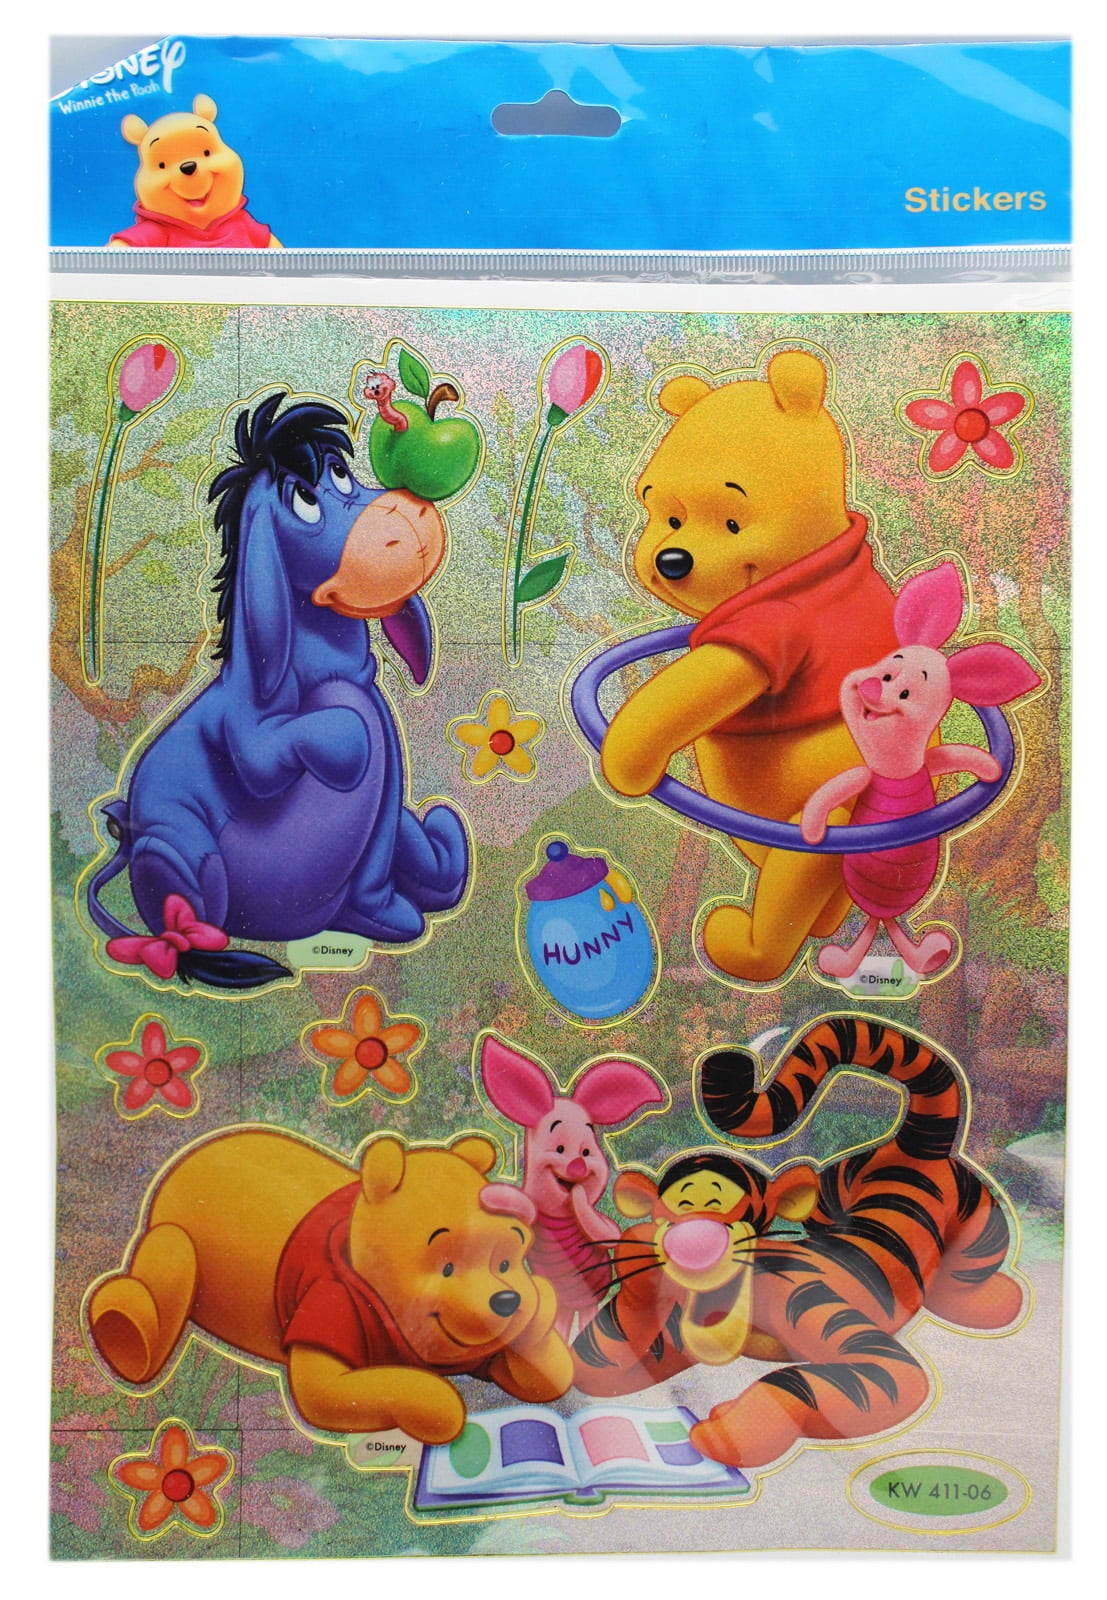 Winnie The Pooh And Friends Themed Set of 50 Assorted Stickers Decal Set